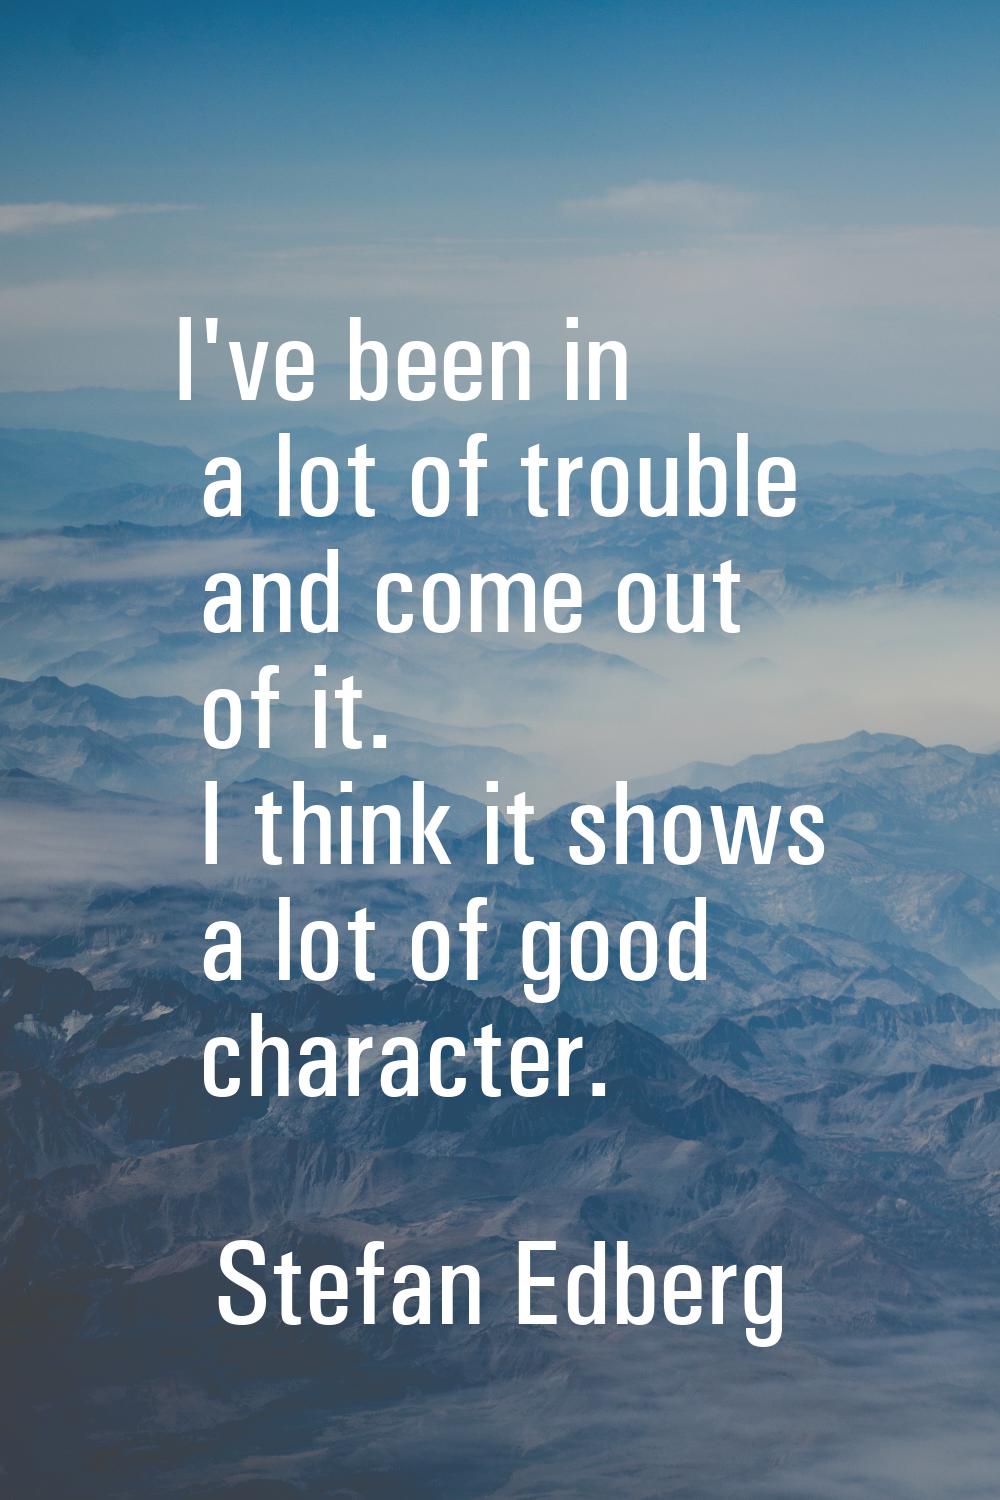 I've been in a lot of trouble and come out of it. I think it shows a lot of good character.